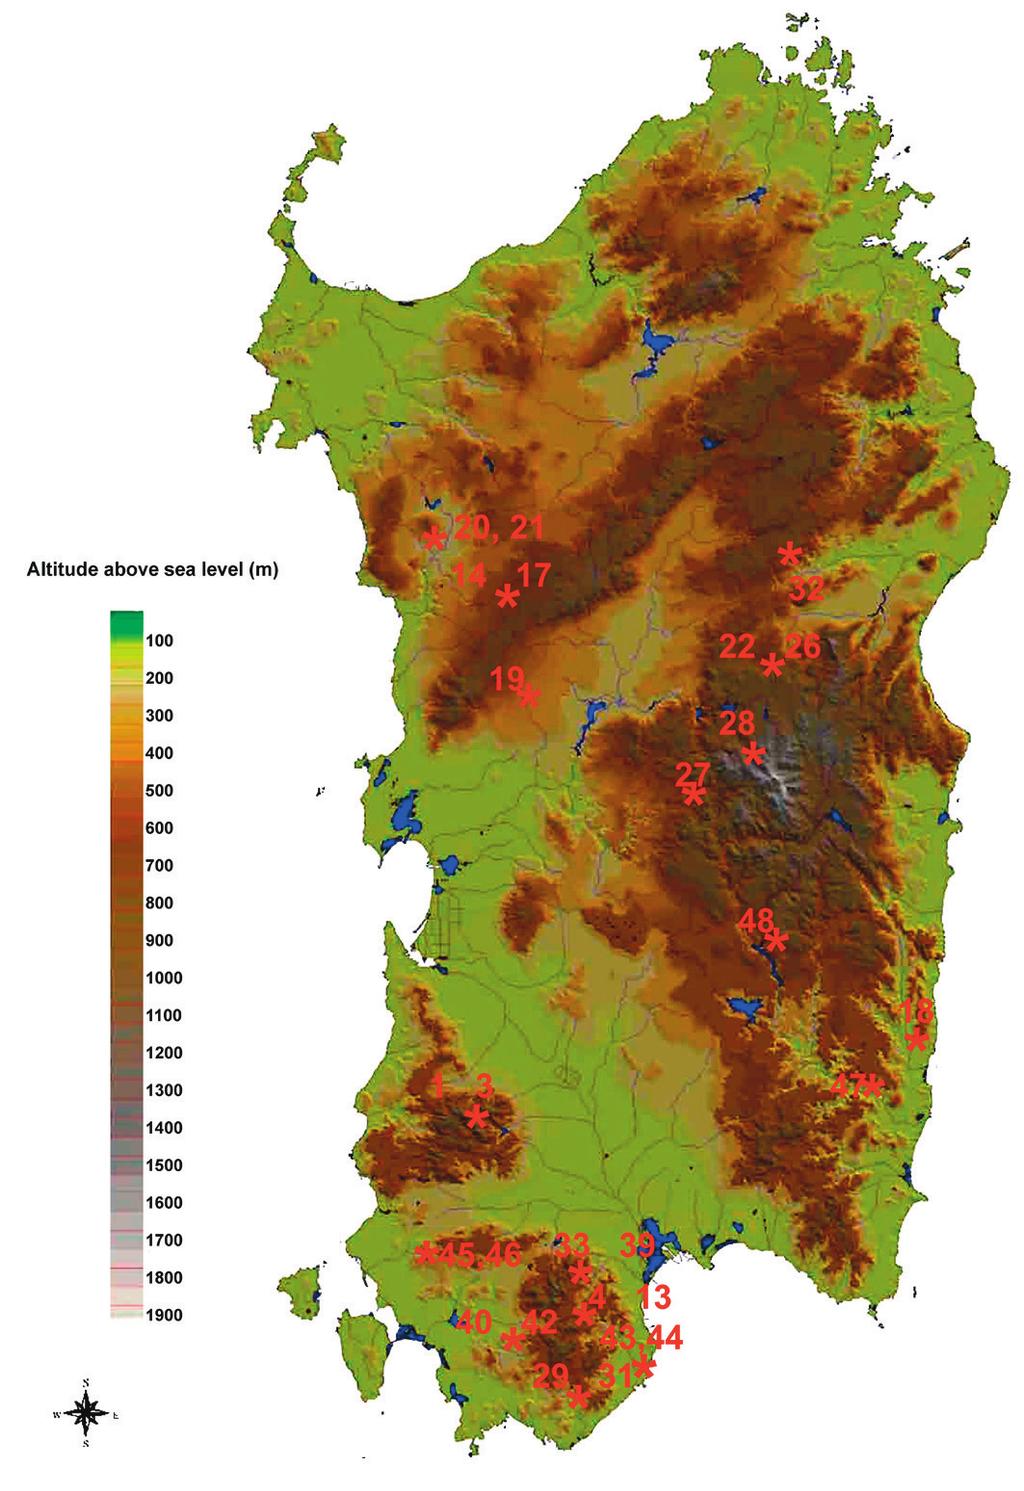 66 Origins and spread of Mediterranean grapevine to analyse the origins of accessions of Cannonau and Garnacha by studying their genetic relationships with wild grapevines in Sardinia.